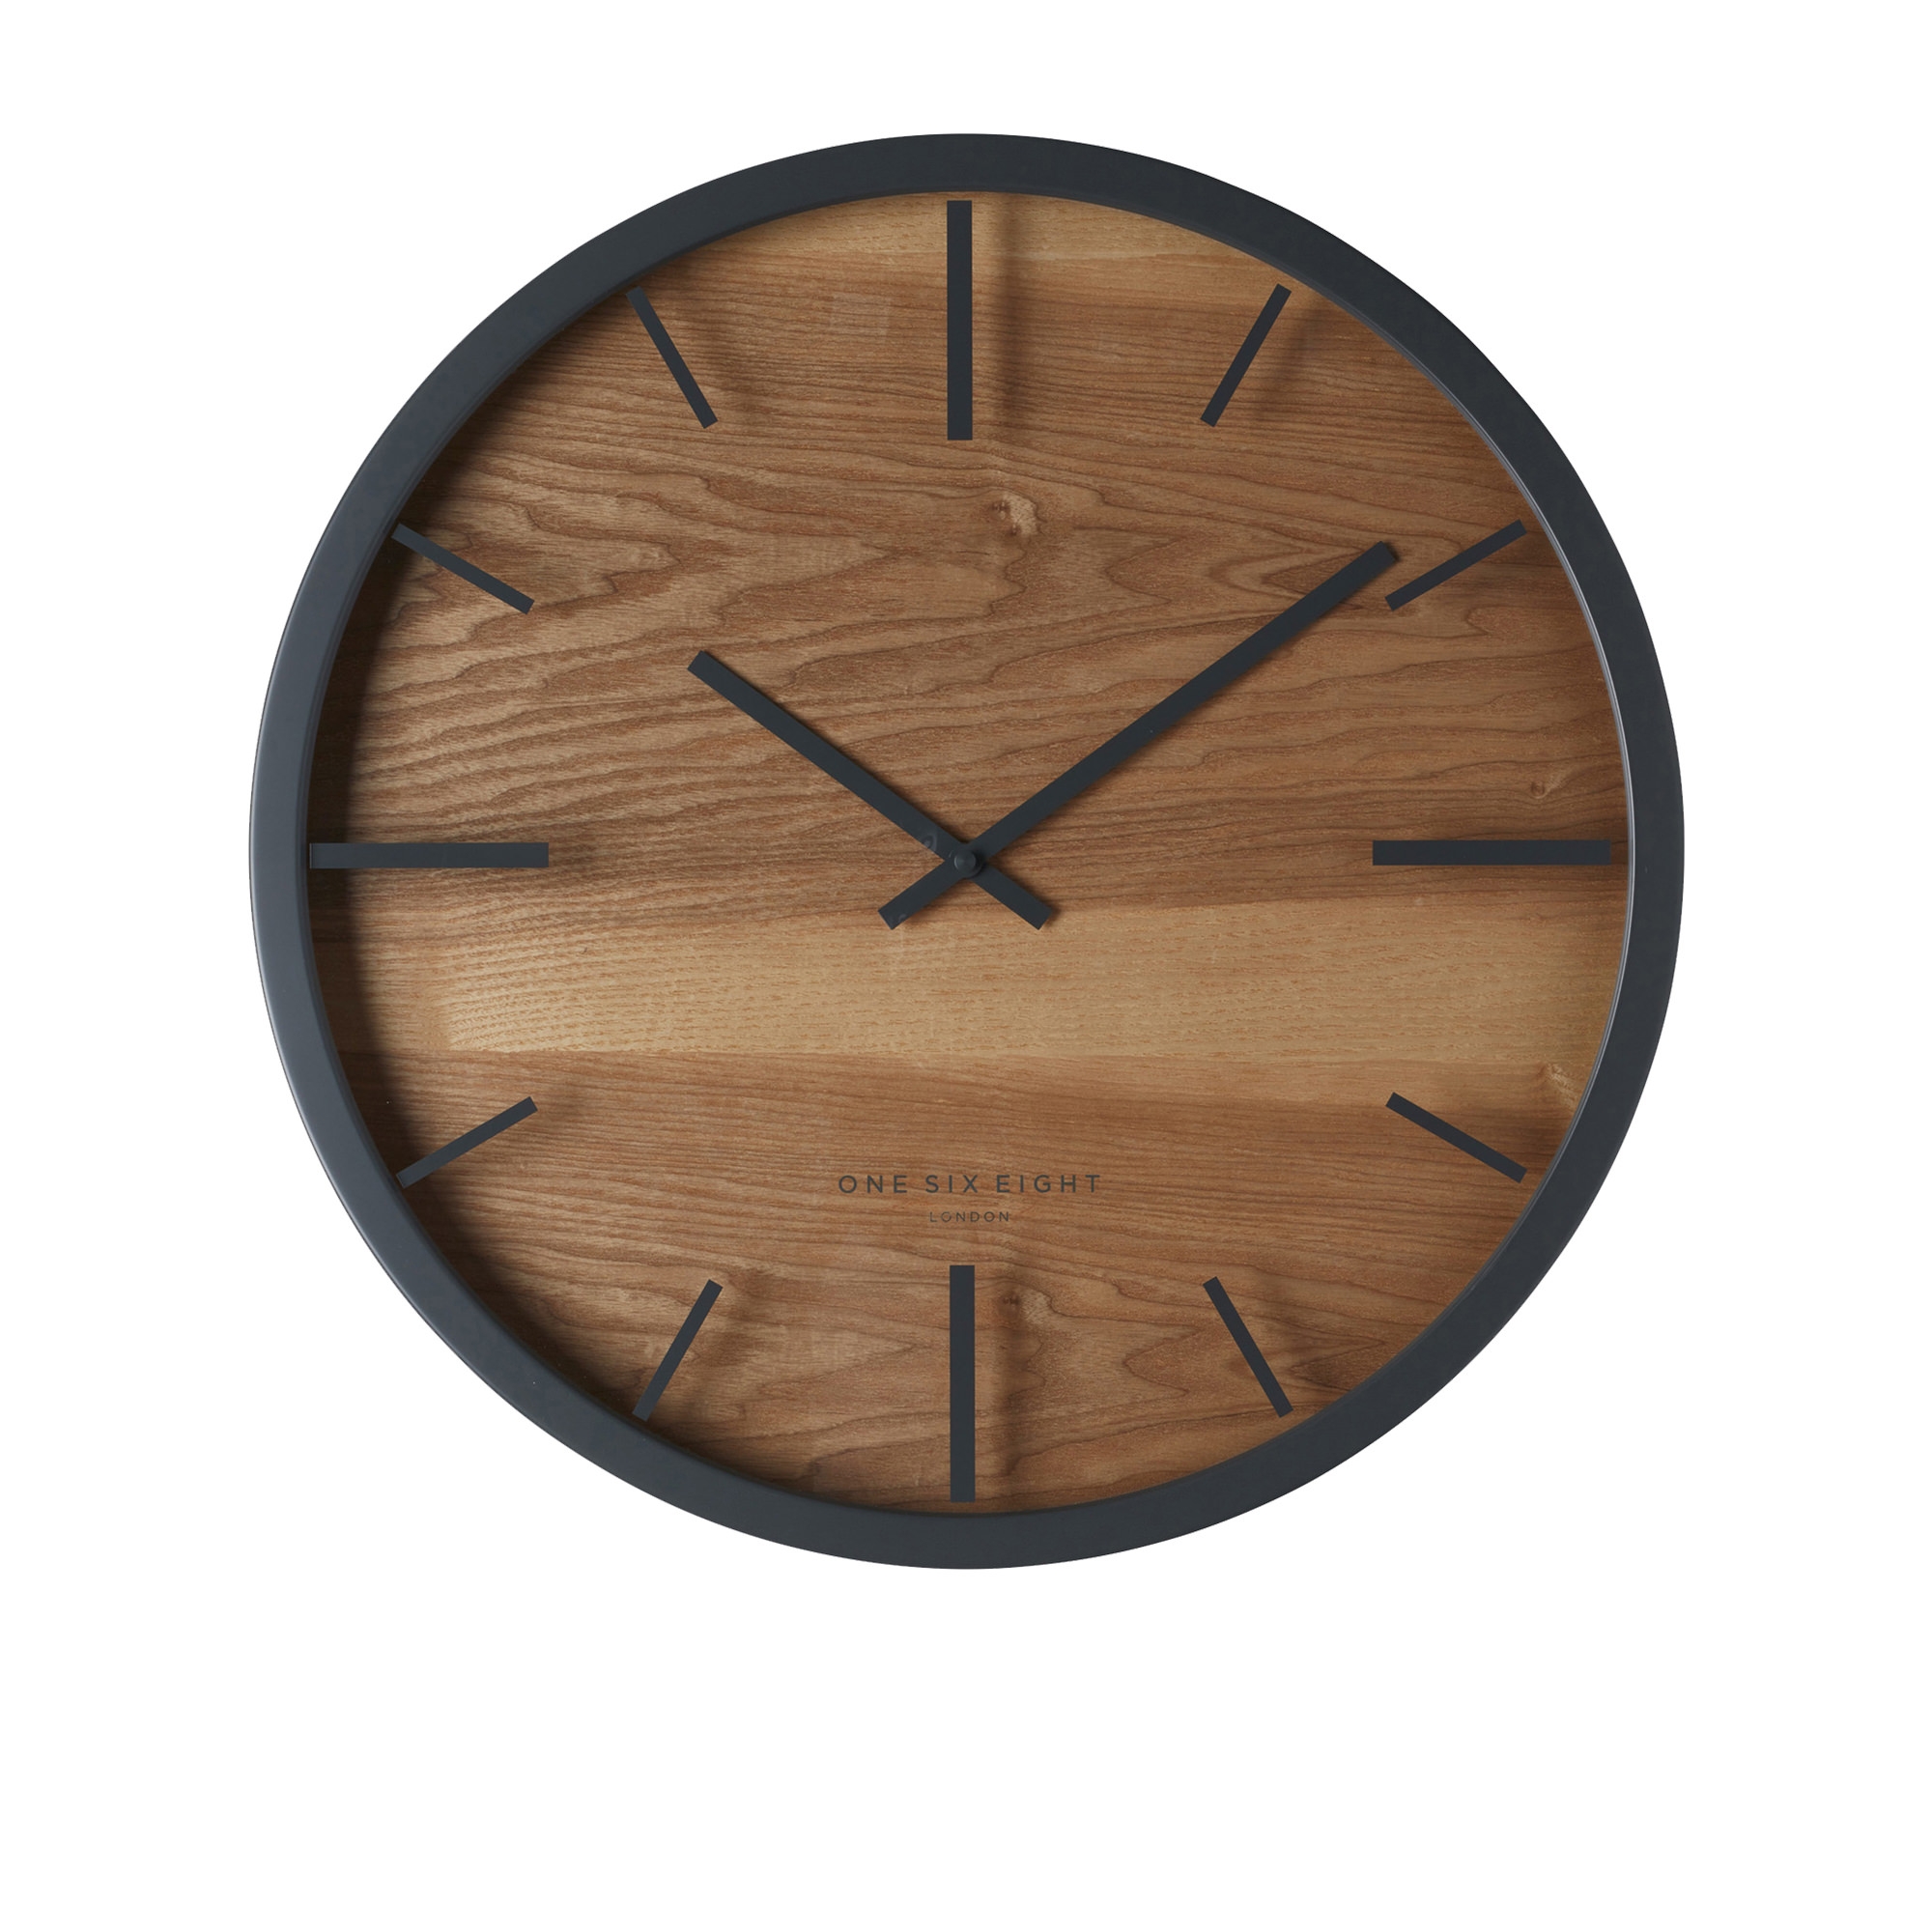 One Six Eight London Willow Silent Wall Clock 50cm Charcoal Grey Image 1